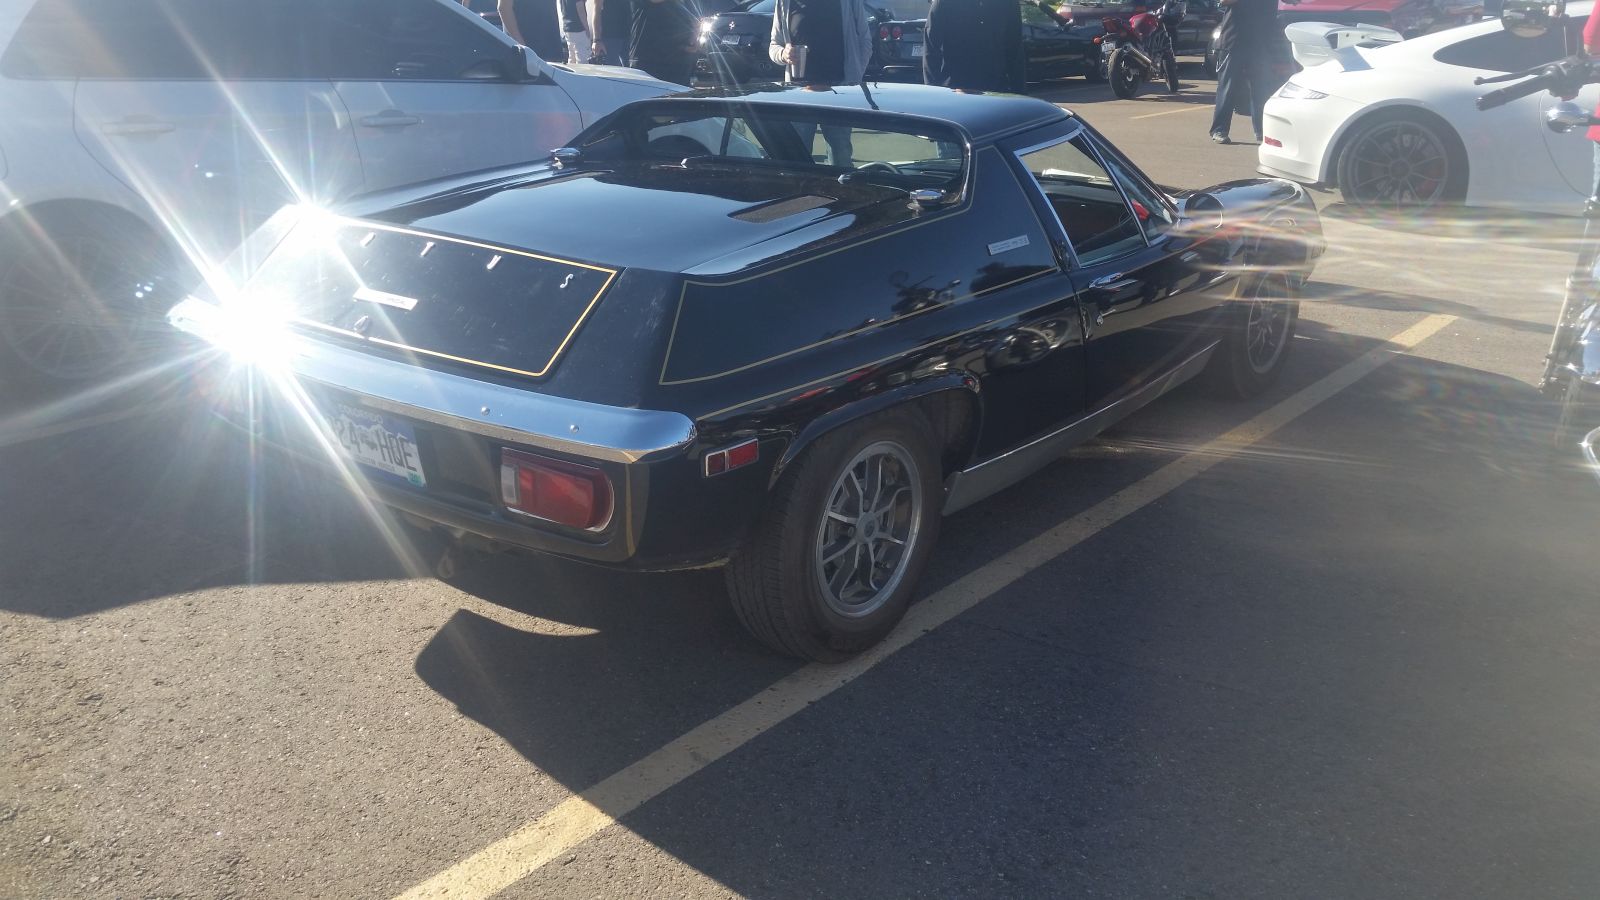 Lotus Europa! Never seen one before.  This was the JPS special edition for when Lotus won the constructor’s championship.